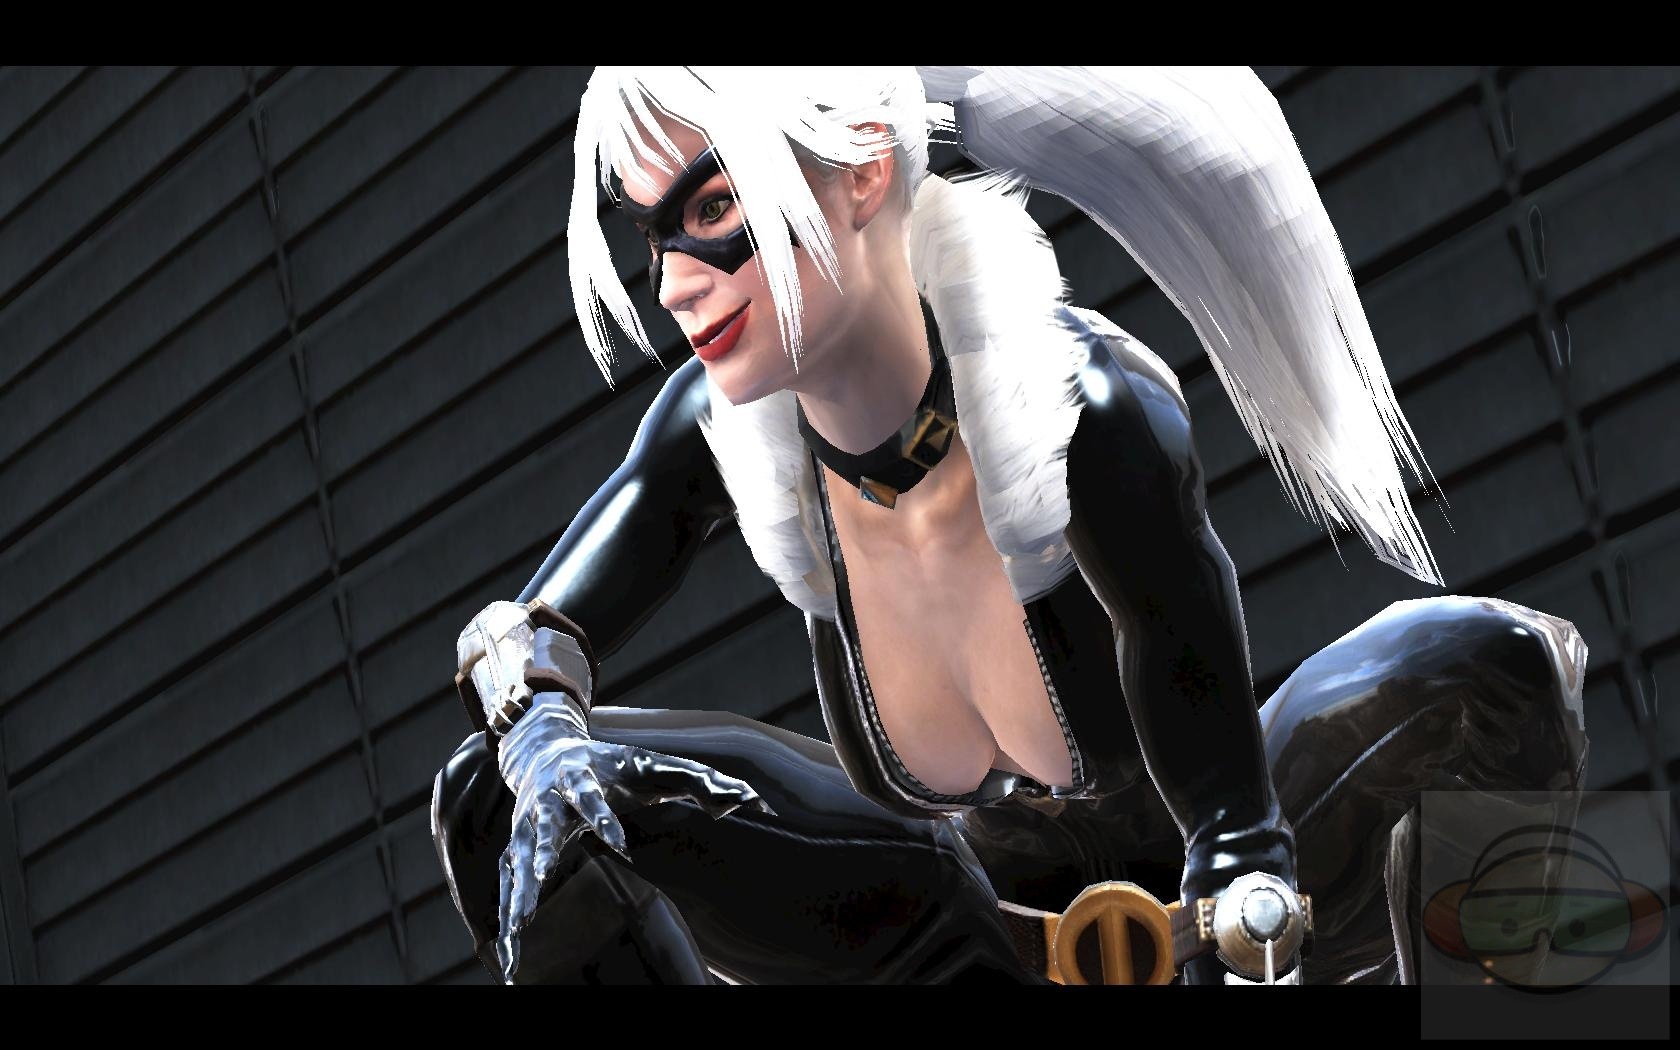 web of shadows Peter had crazy rizz #webofshadows #spidermanwebofshado, web of shadows black cat